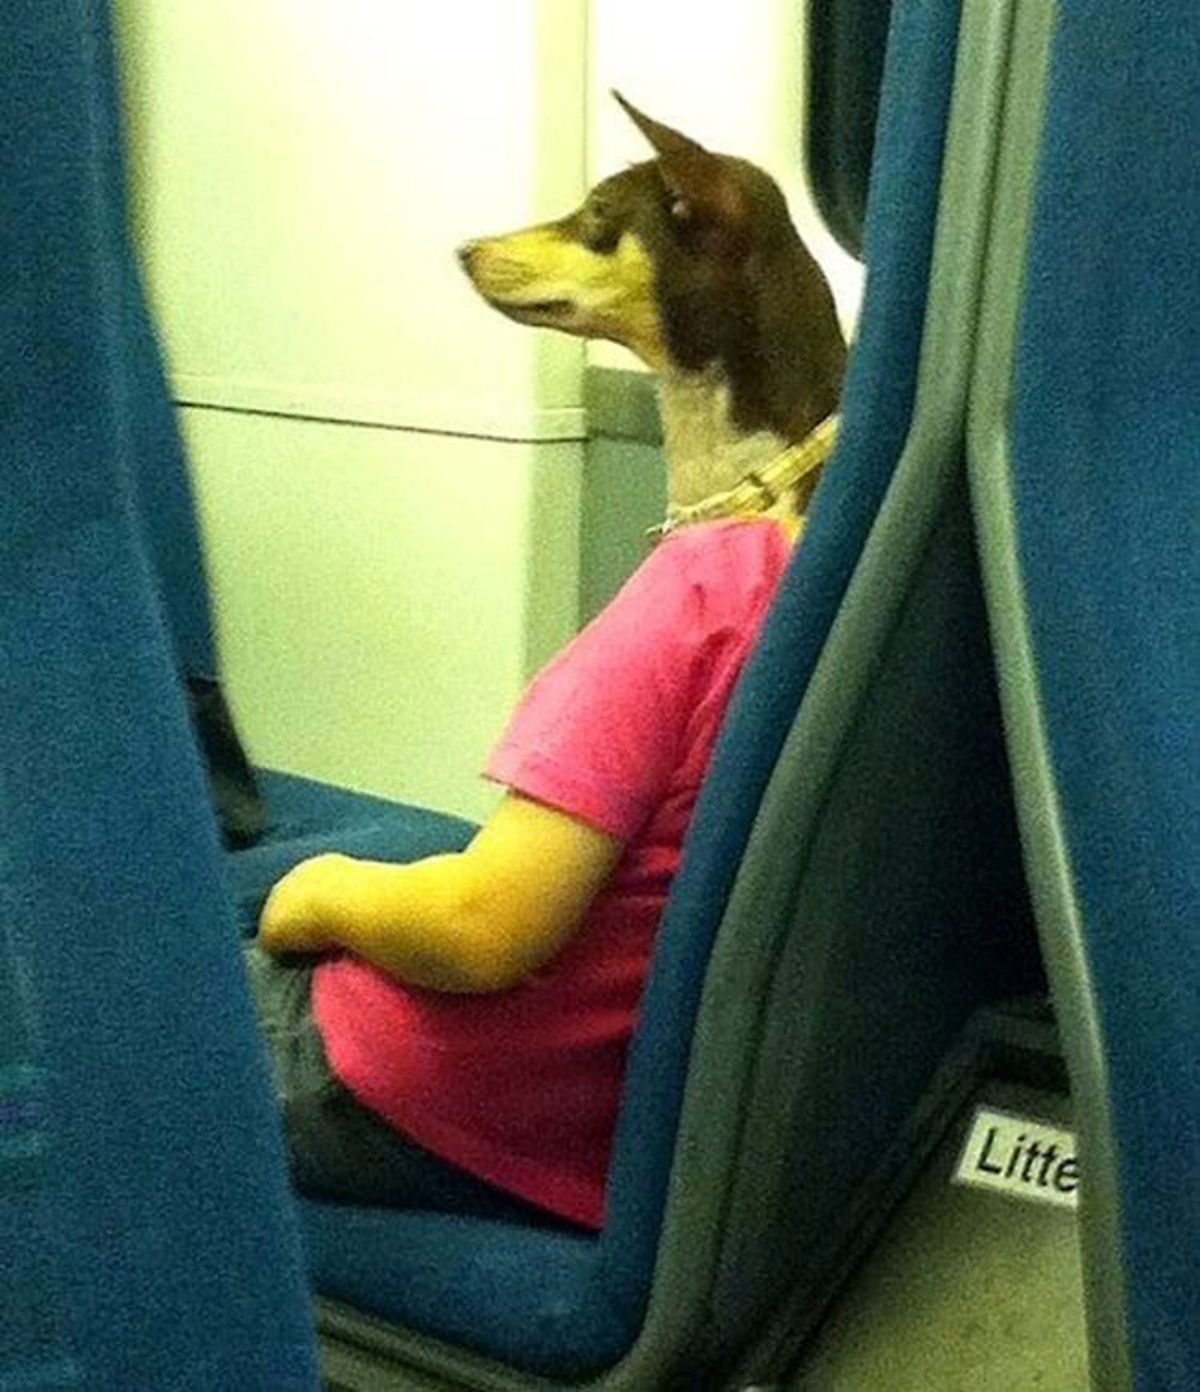 black and white dog sitting next to a woman in a pink shirt looking like the dog is wearing a pink shirt with a human arm